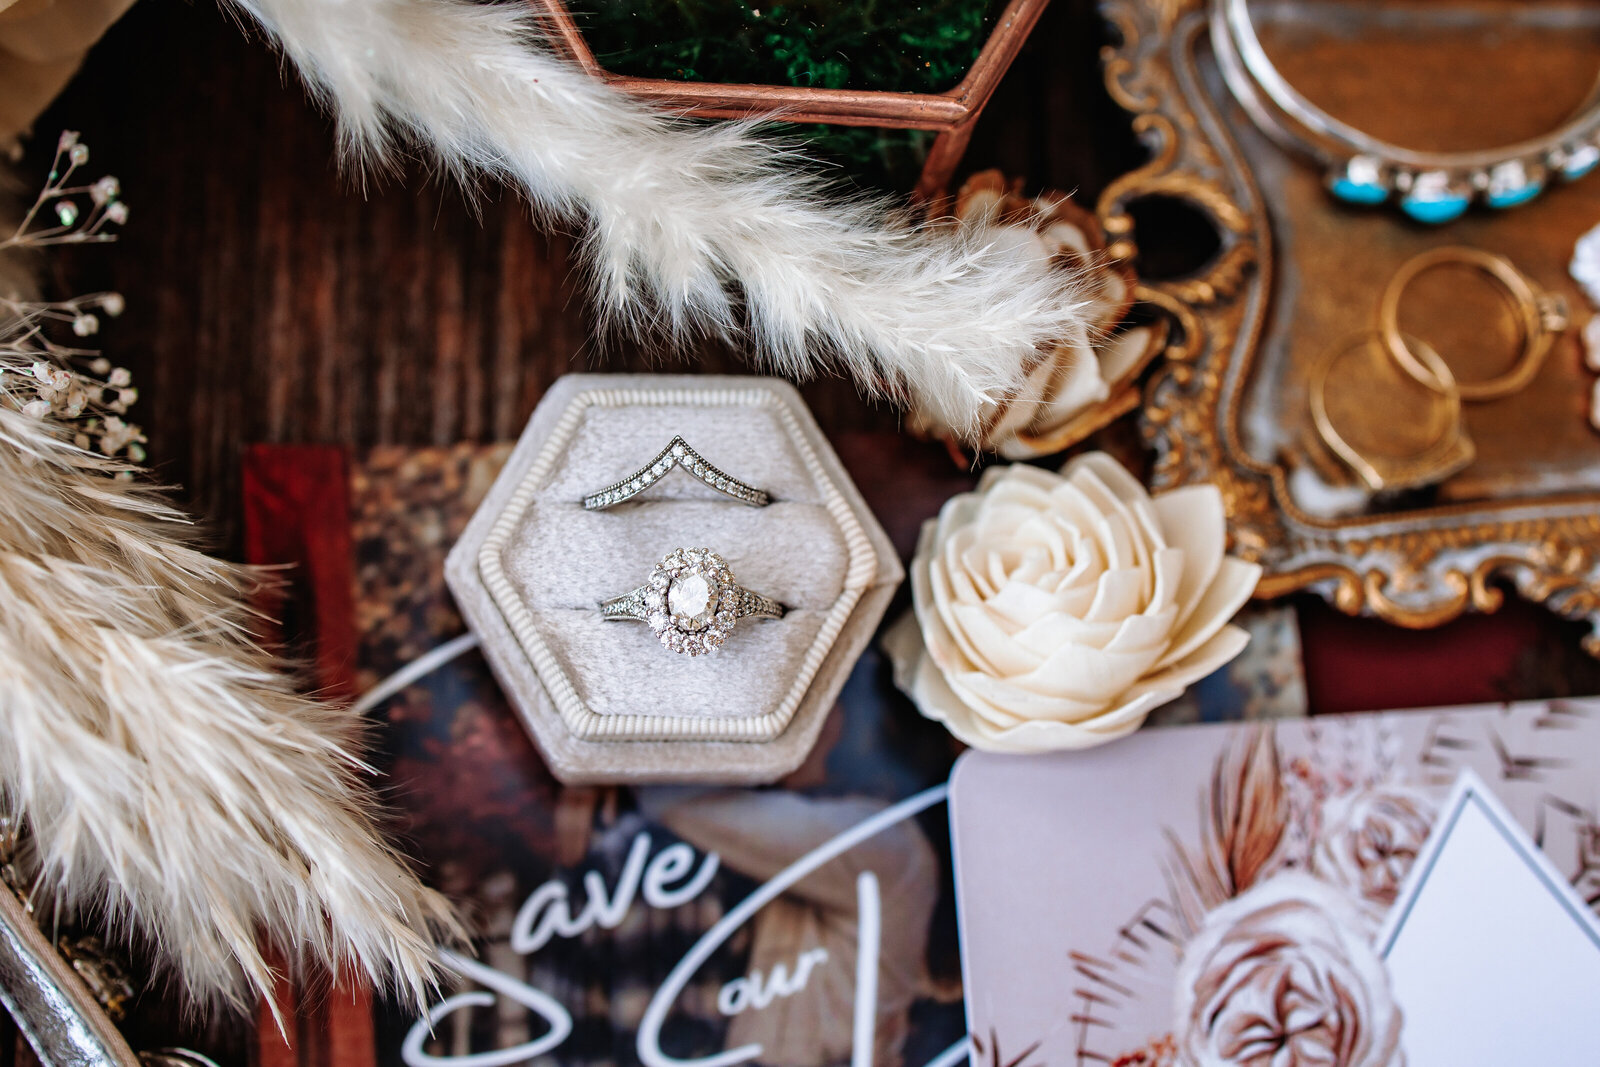 Flat lay of wedding detail items with rings front and center